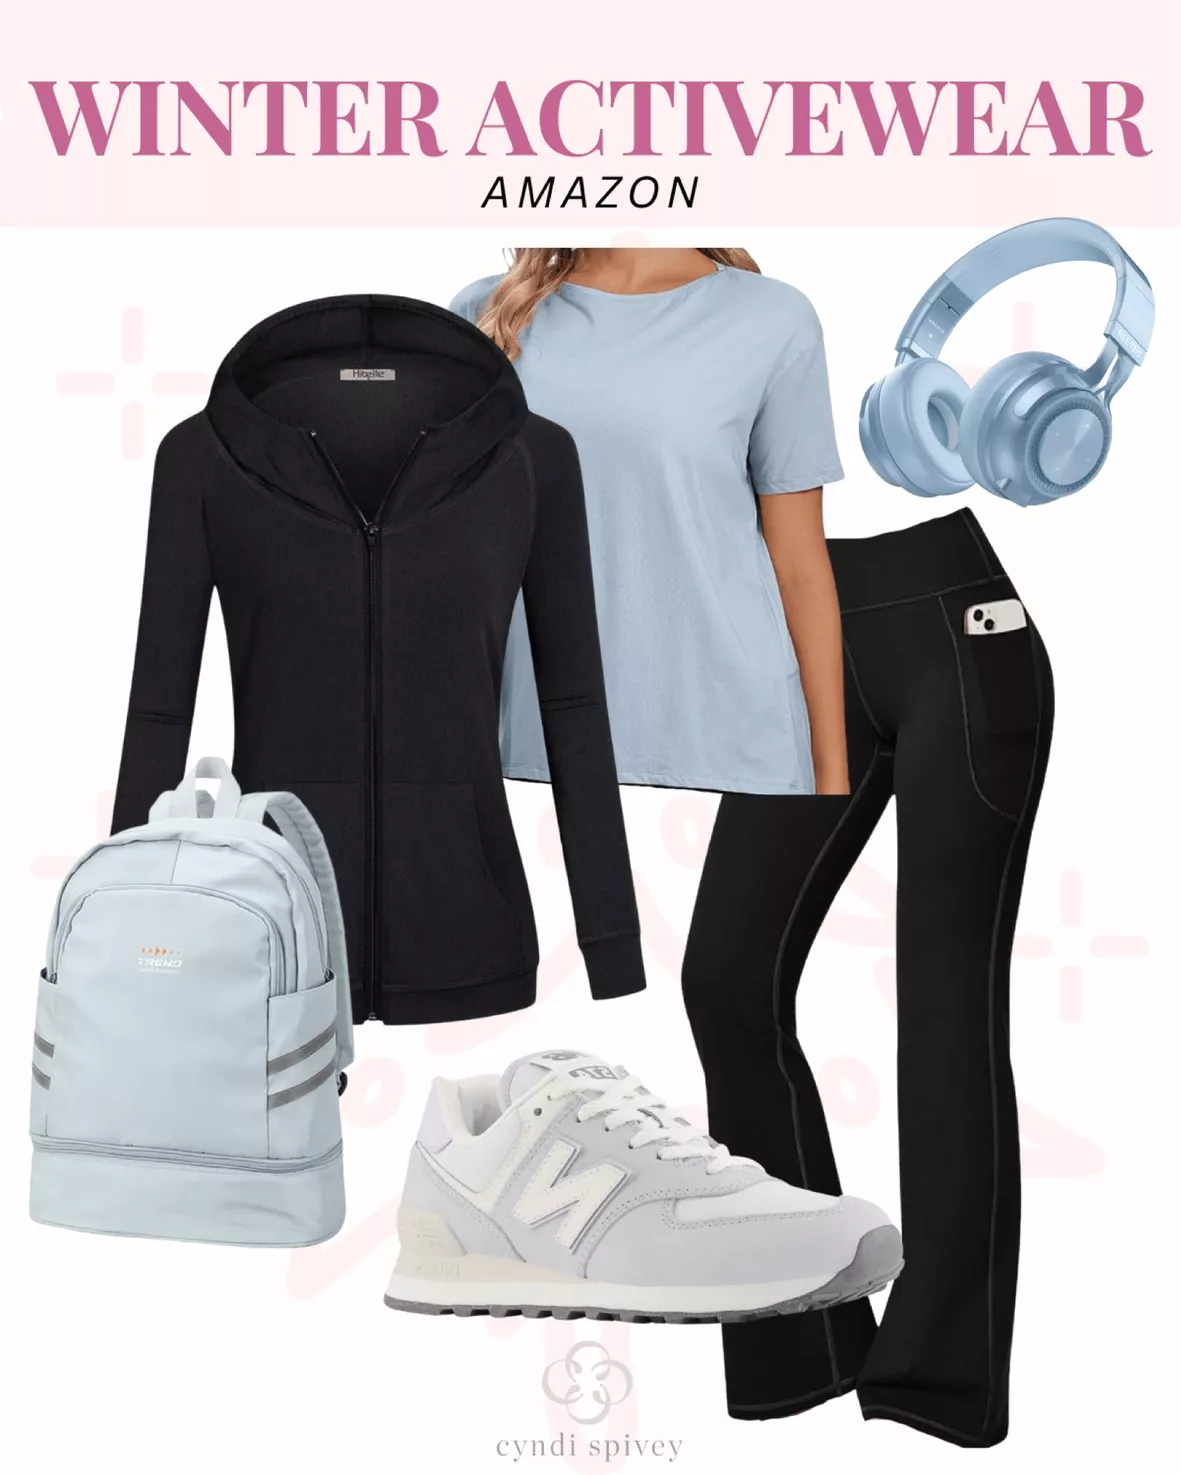 Athletic Wear For The New Year - Cyndi Spivey